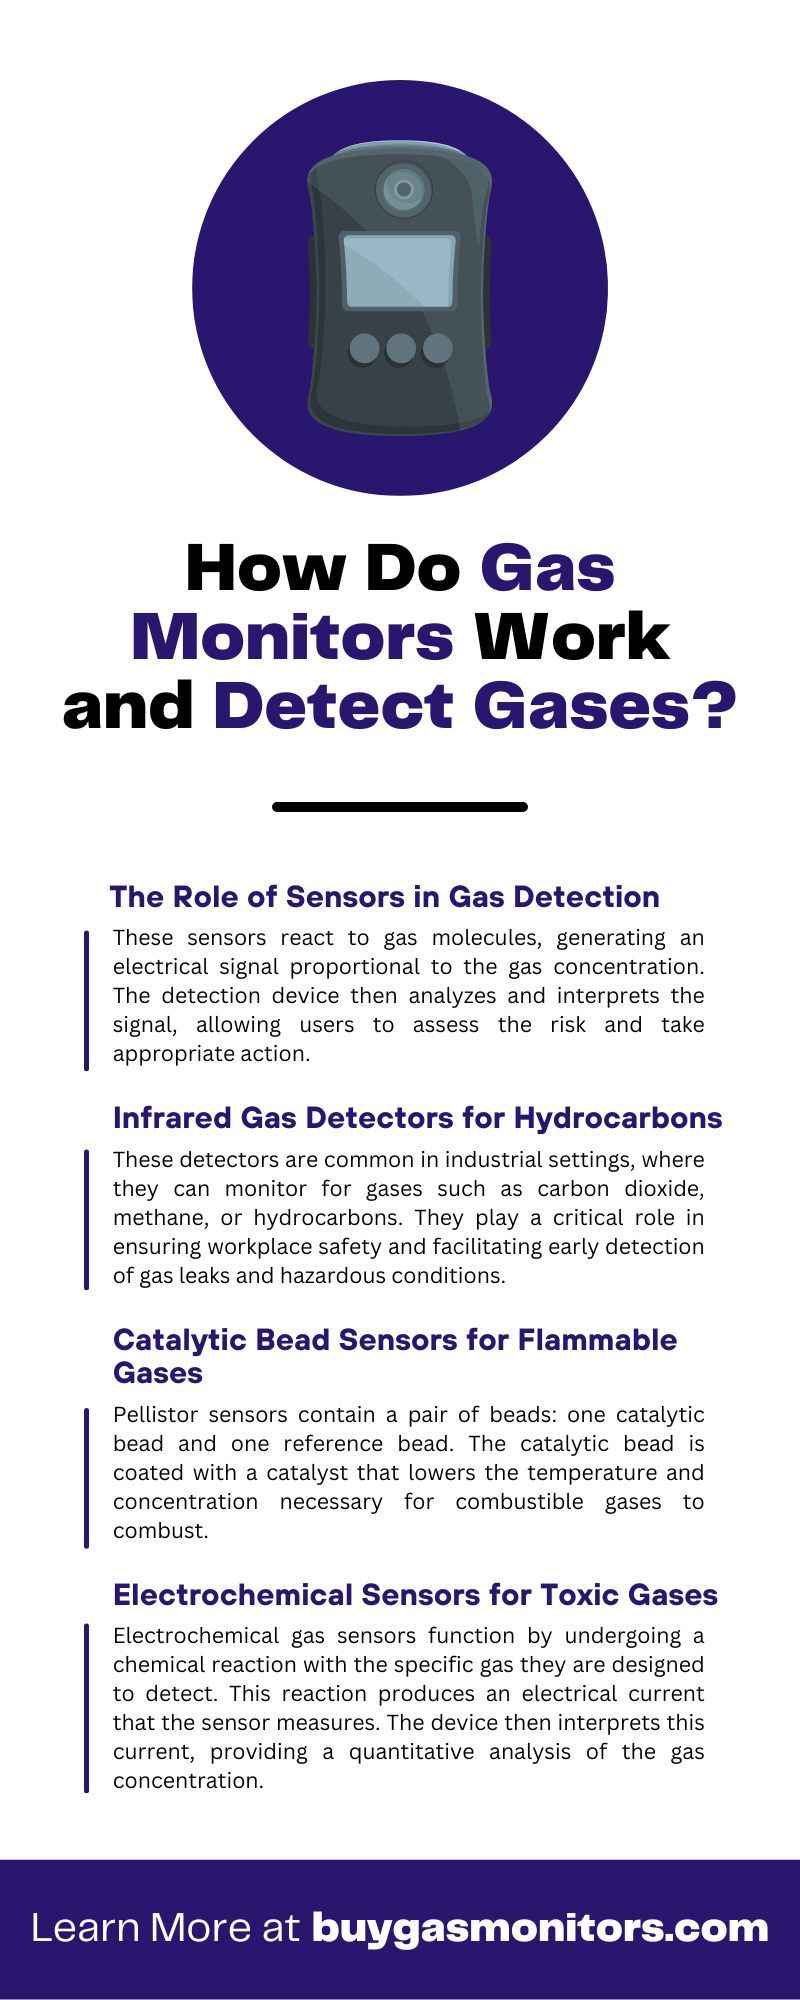 How Do Gas Monitors Work and Detect Gases?